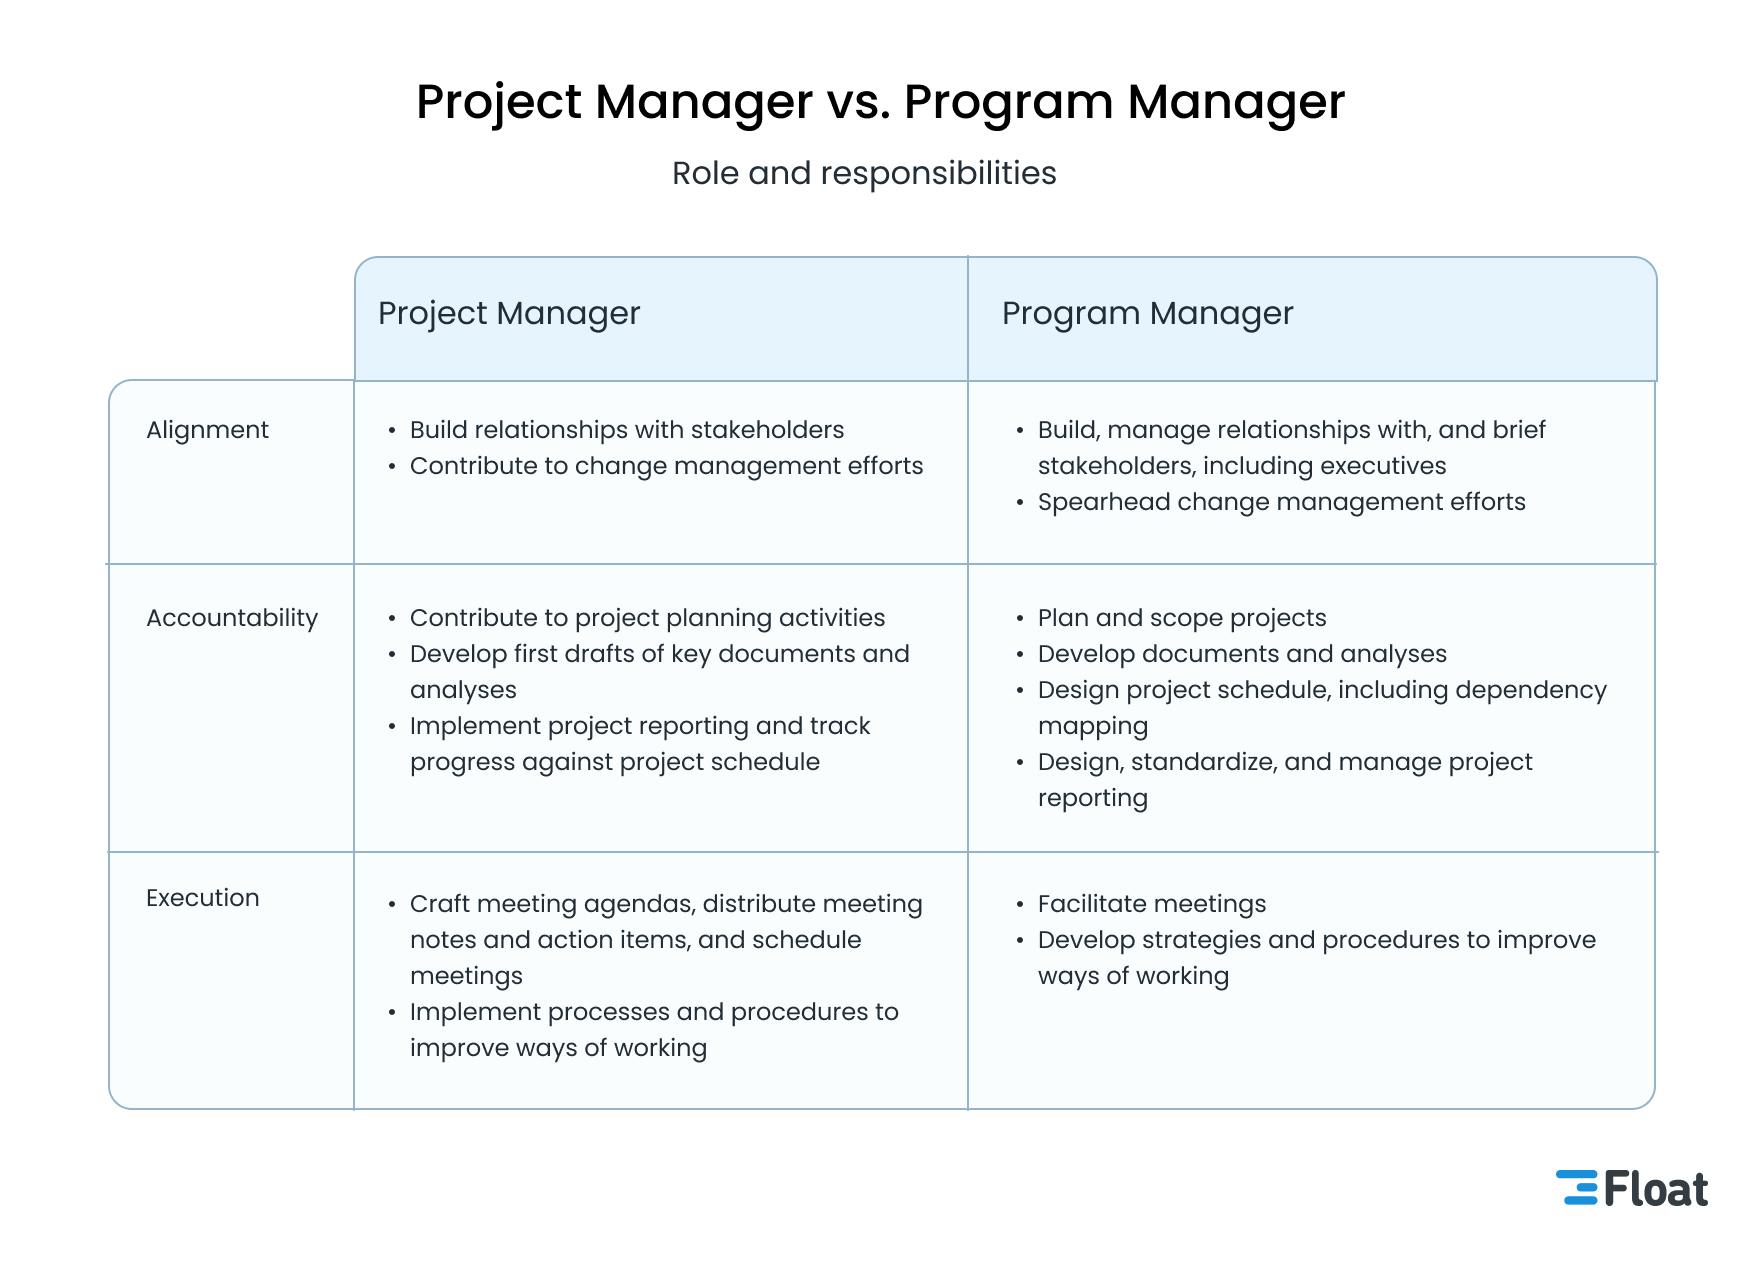 A comparison of the role and responsibilities of program managers vs project managers